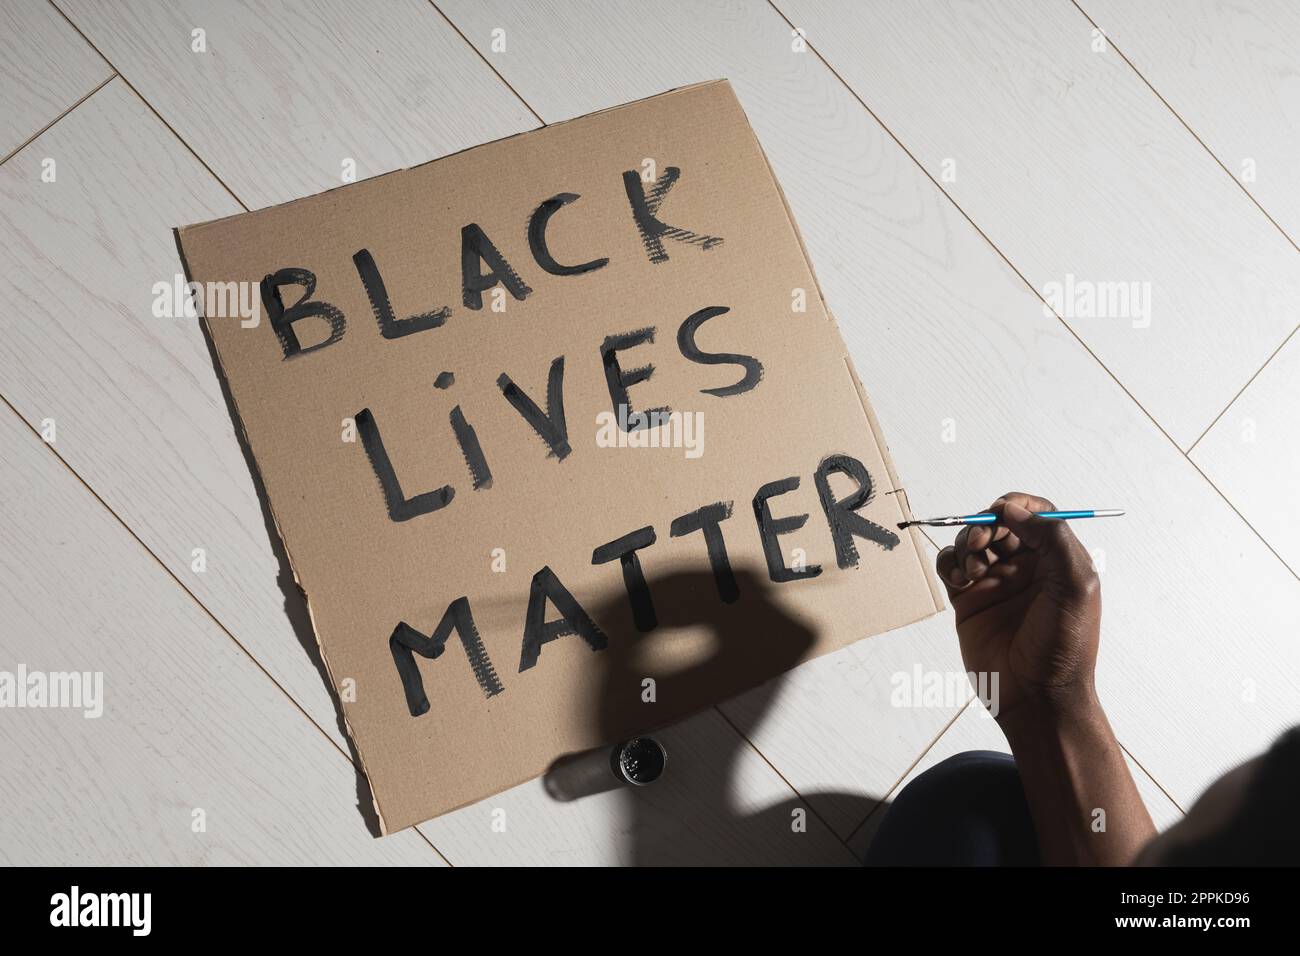 Black lives matter and fight against racism and write sign and words on cardboard - protest concept and blm activism Stock Photo